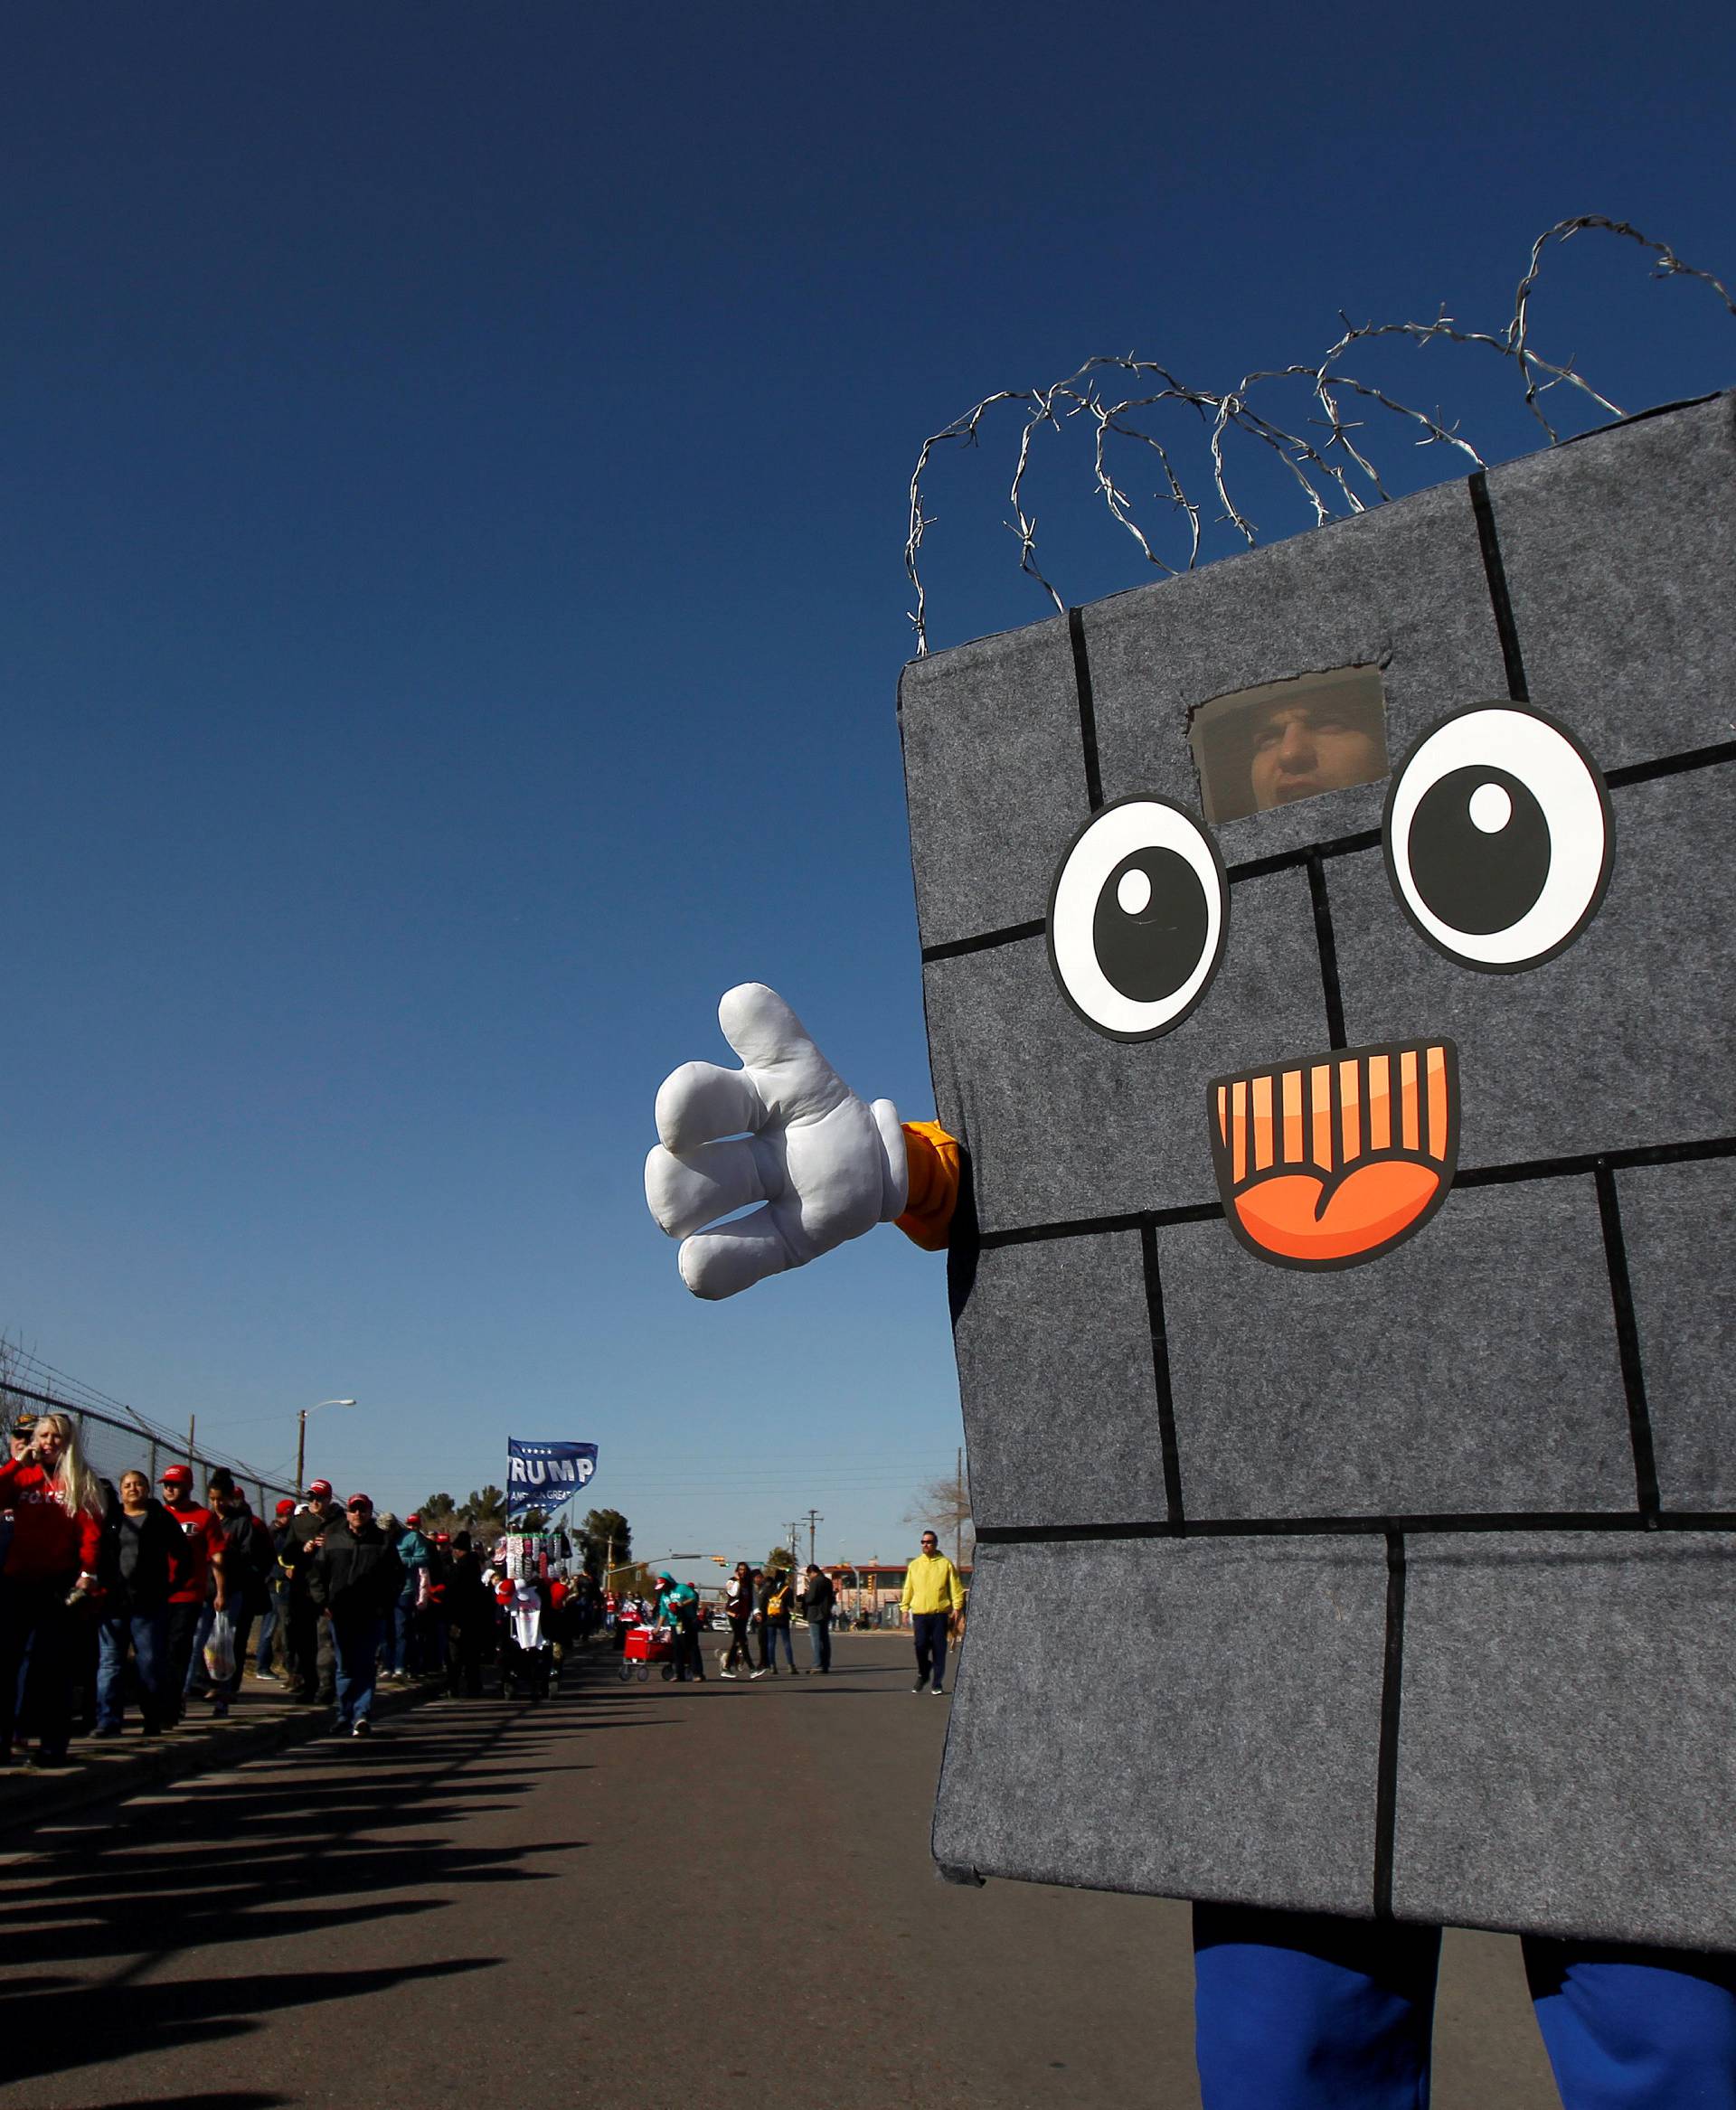 A Trump supporter dressed up as a border wall is seen as others queue to enter El Paso County Coliseum for a rally by U.S. President Trump in El Paso